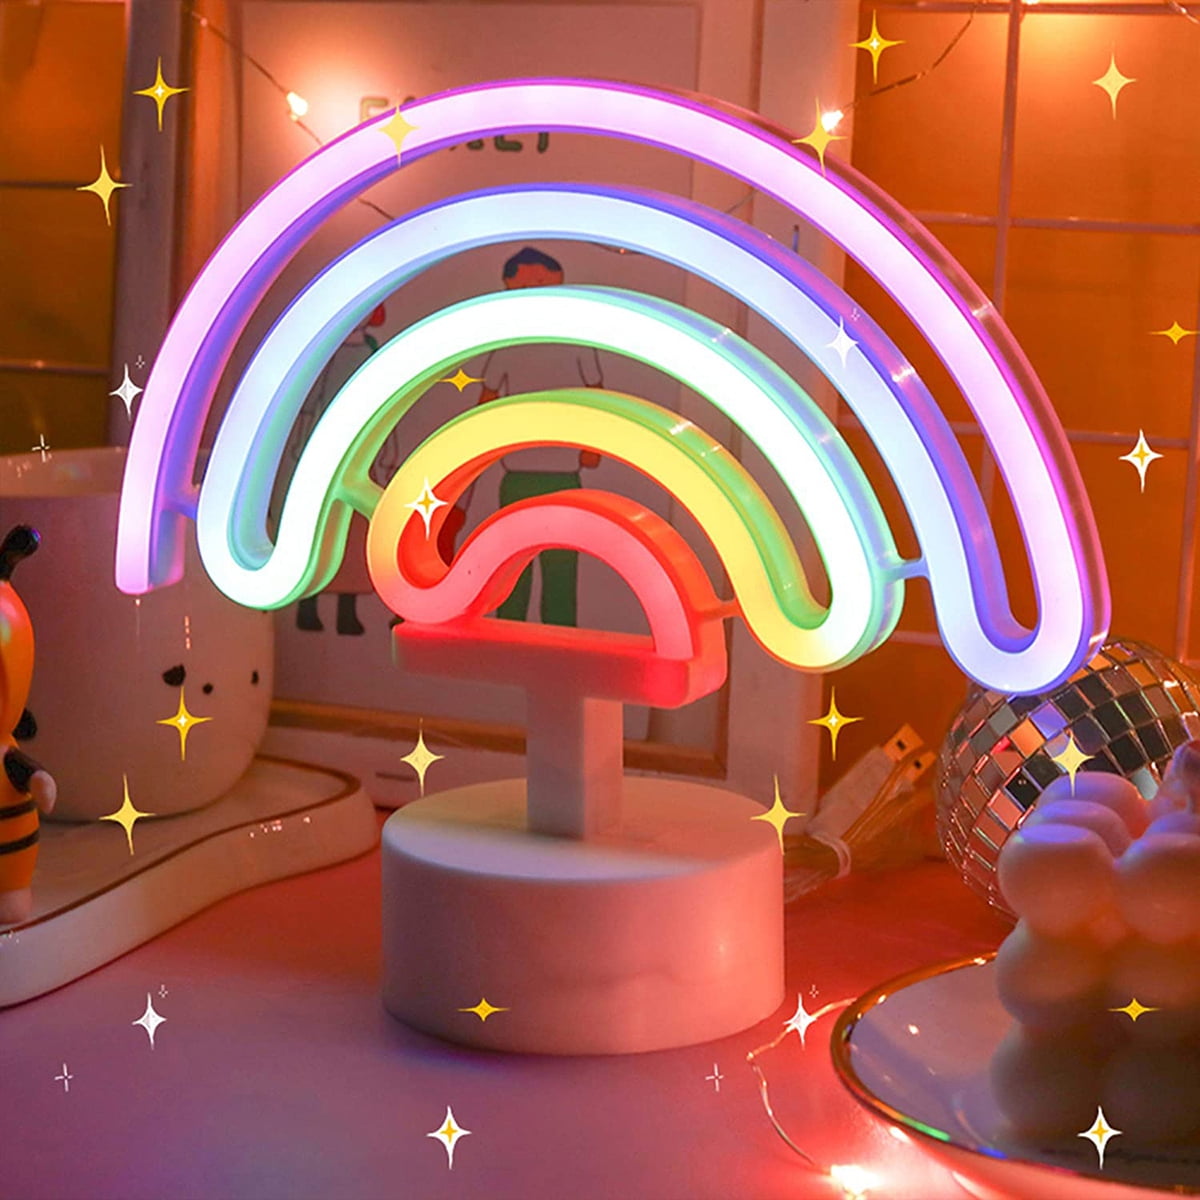 Gpoty Neon Sign LED Rainbow-shaped Neon Light Battery/USB Powered Colorful  Neon Lamp with Holder Base Rainbow Nightlight Decorative Table Light for 